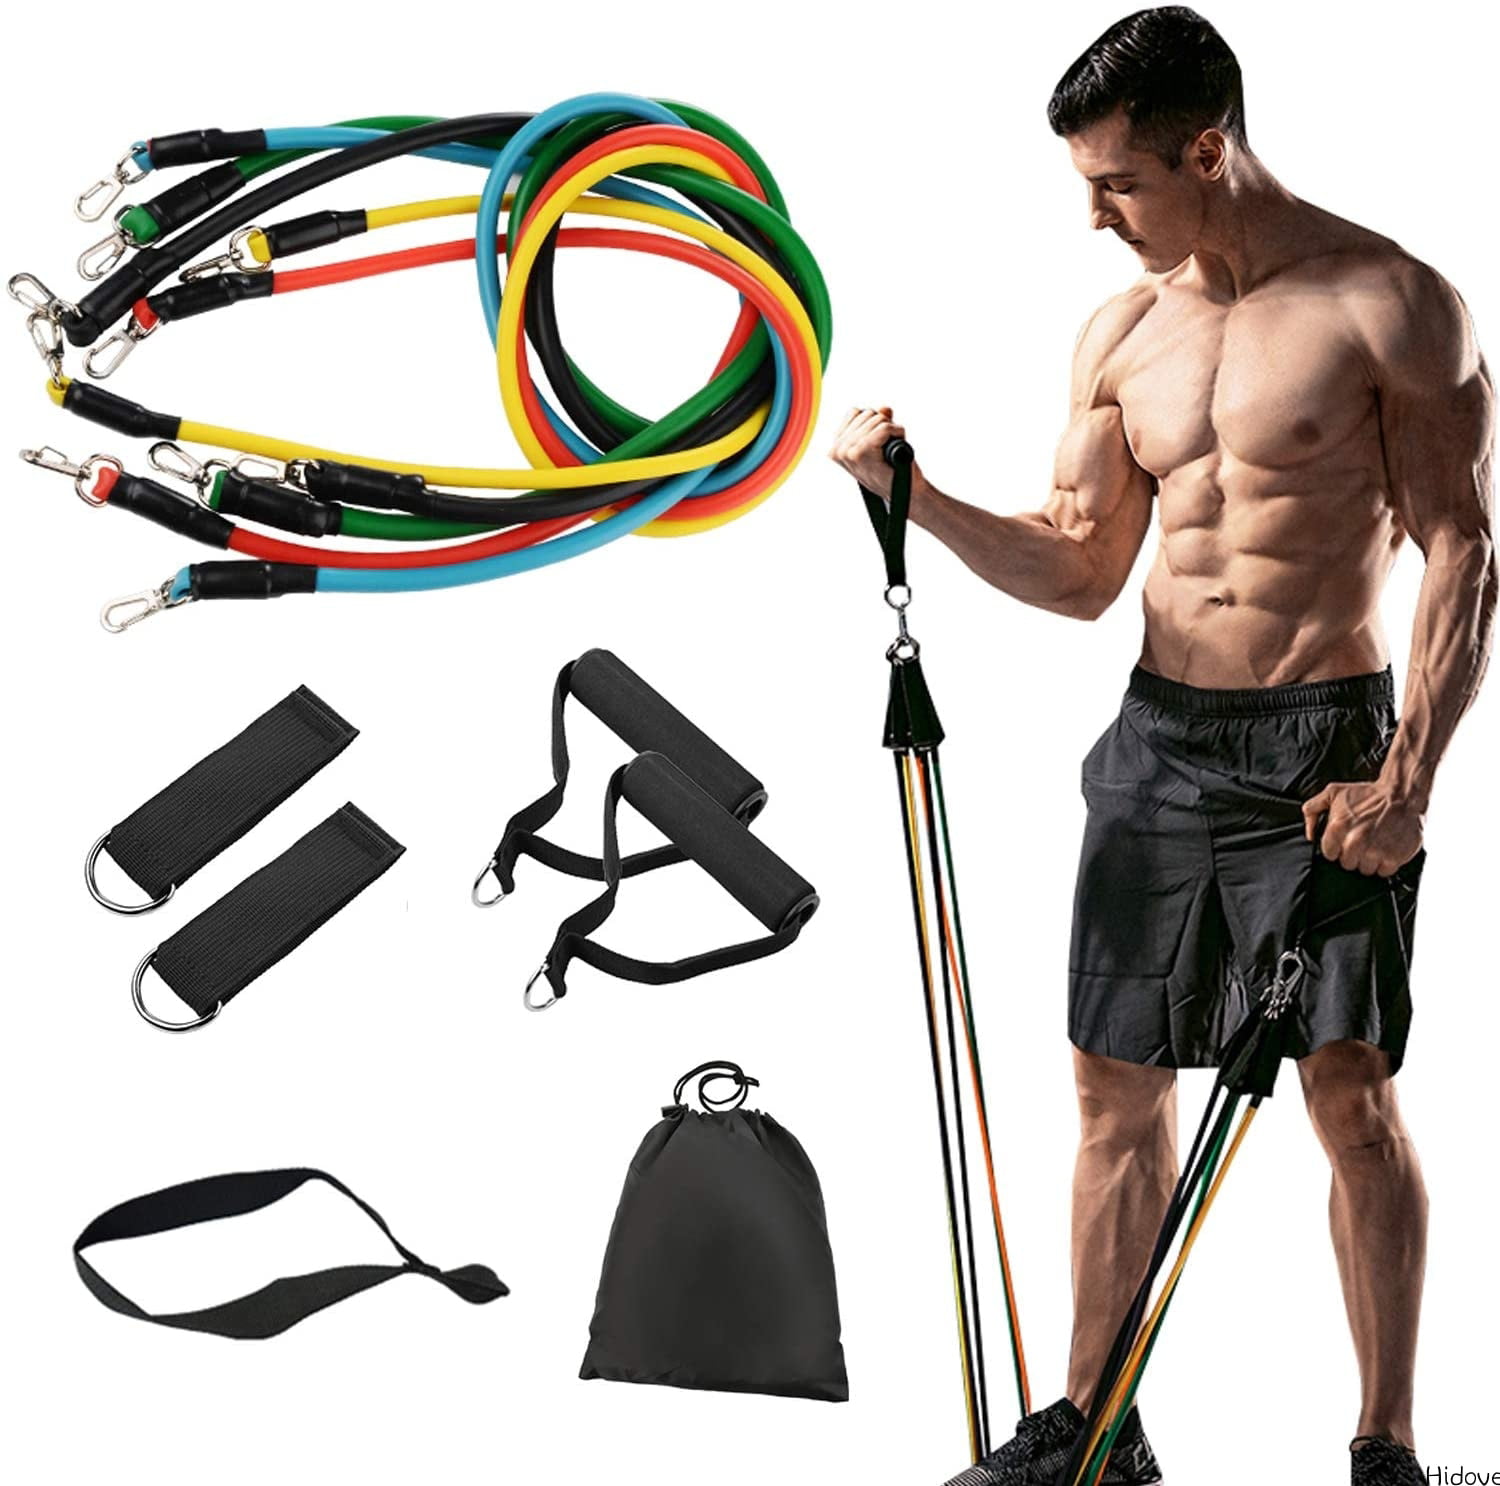 Suspension Trainer Kit Bodyweight Resistance Straps Home Gym Fitness Training 